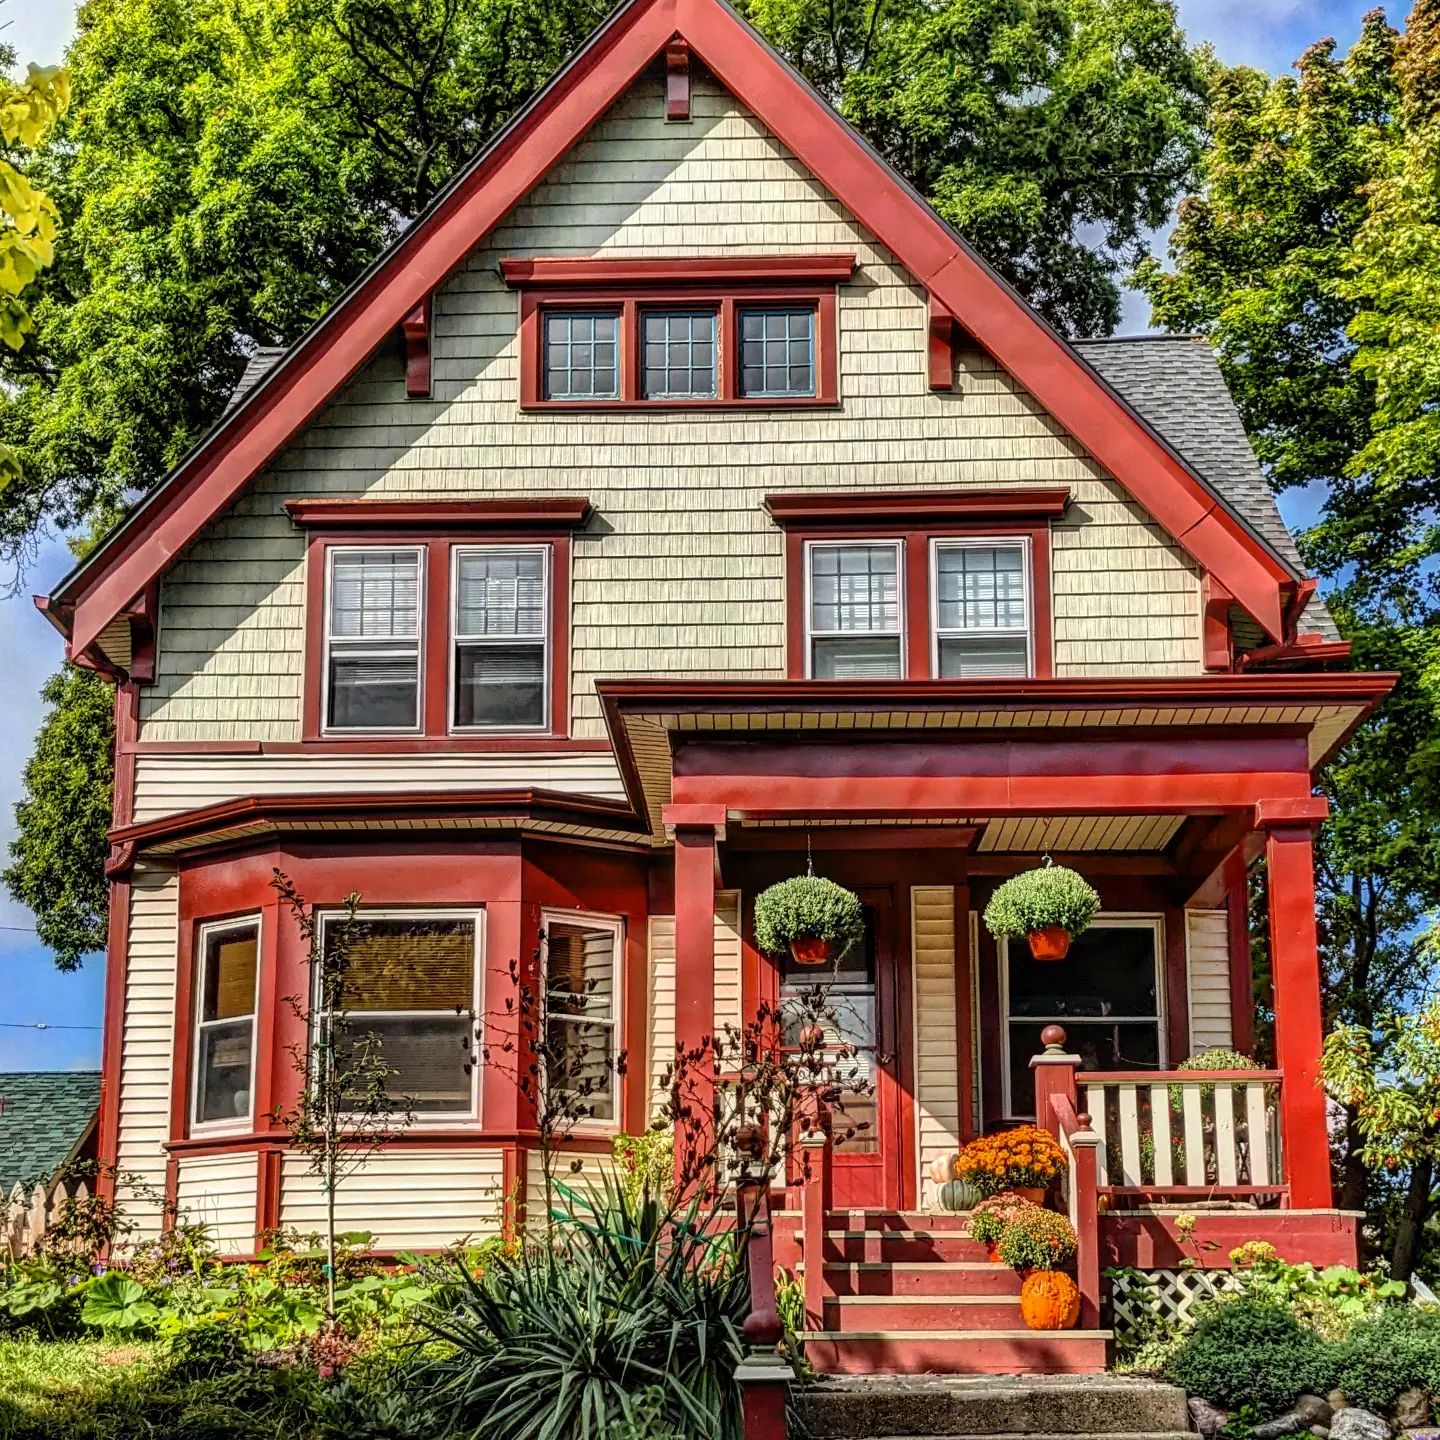 Quaint red and white home in the Bay View neighborhood of Milwaukee. Photo by Instagram user @debskaleidoscope